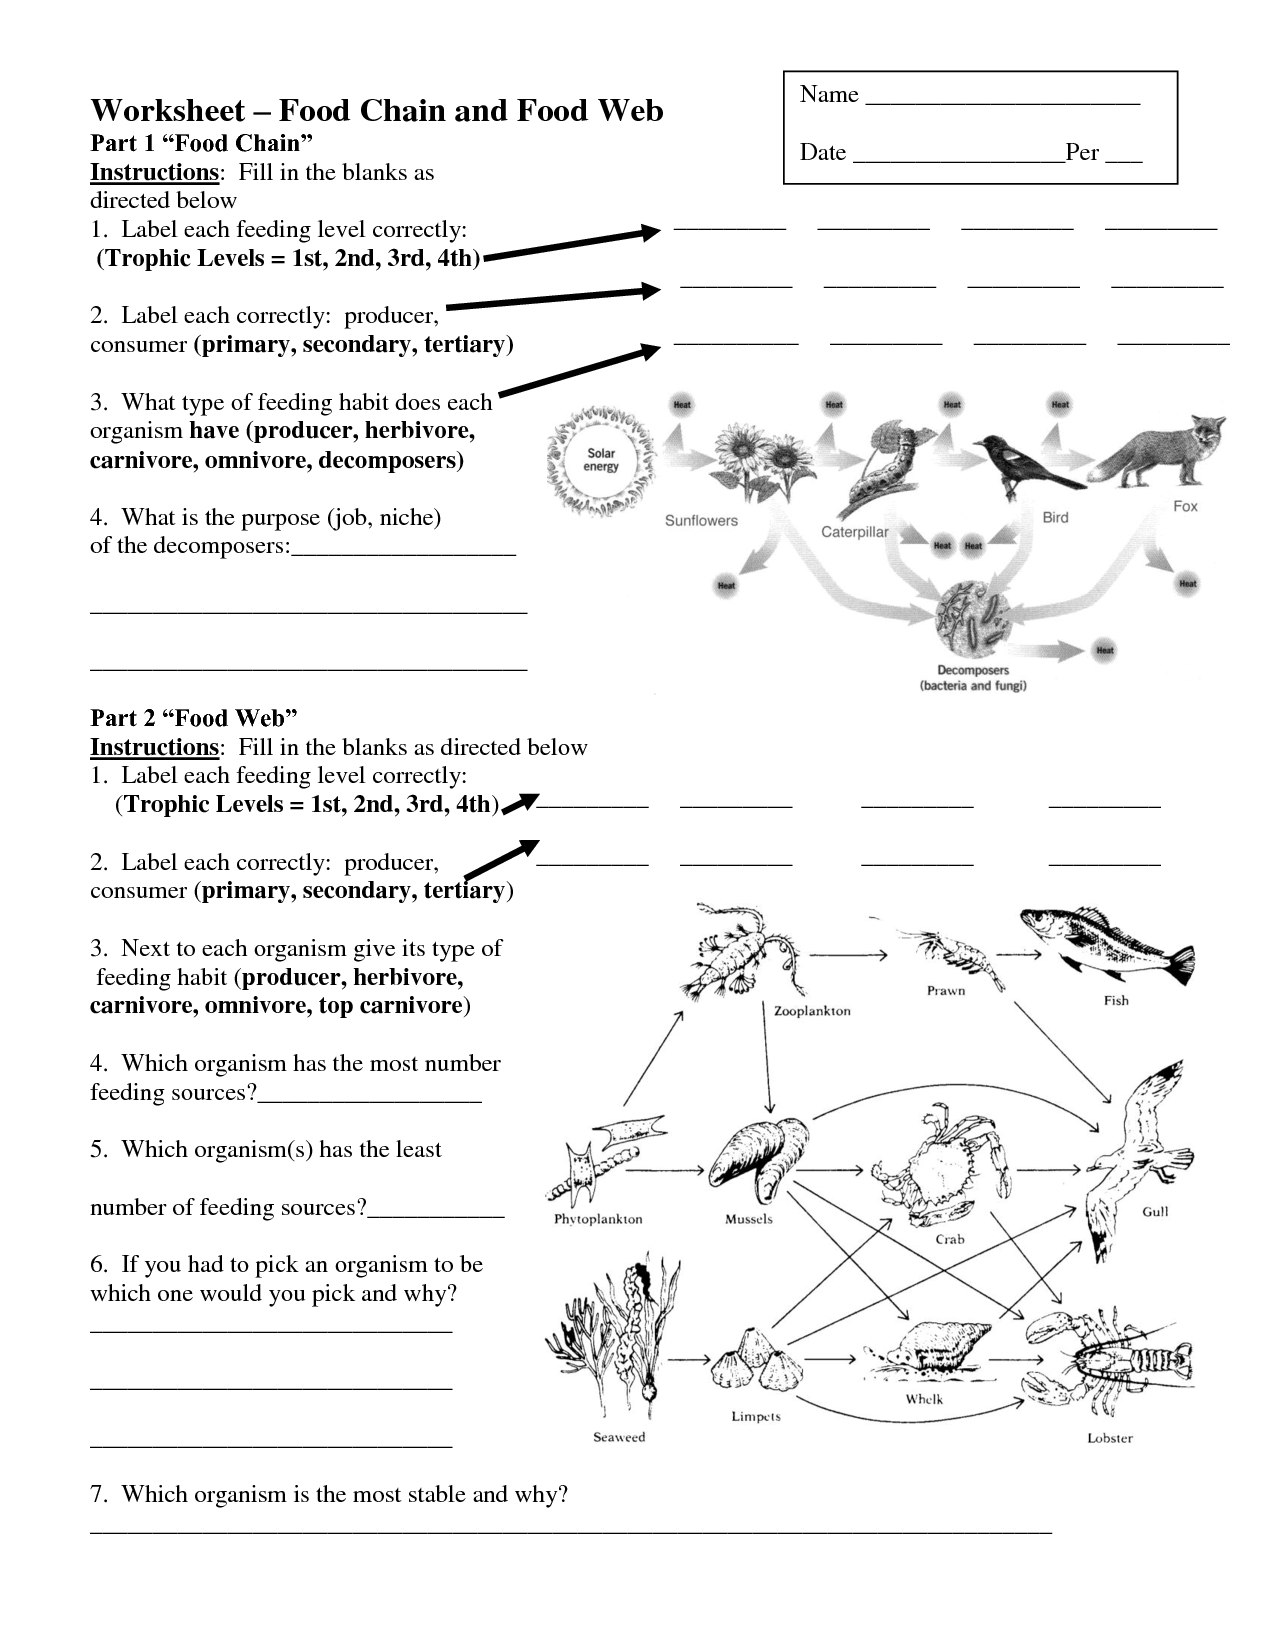 8-best-images-of-4th-grade-science-food-chain-worksheet-worksheets-on